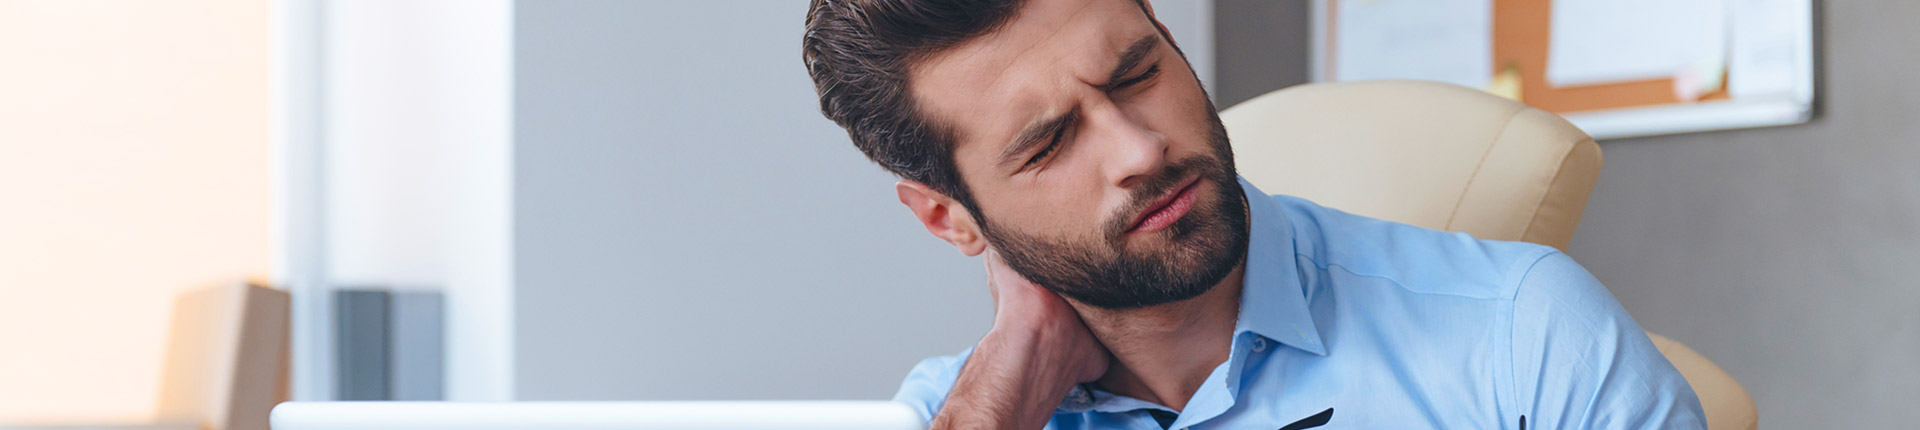 man with pain expression and hand on neck